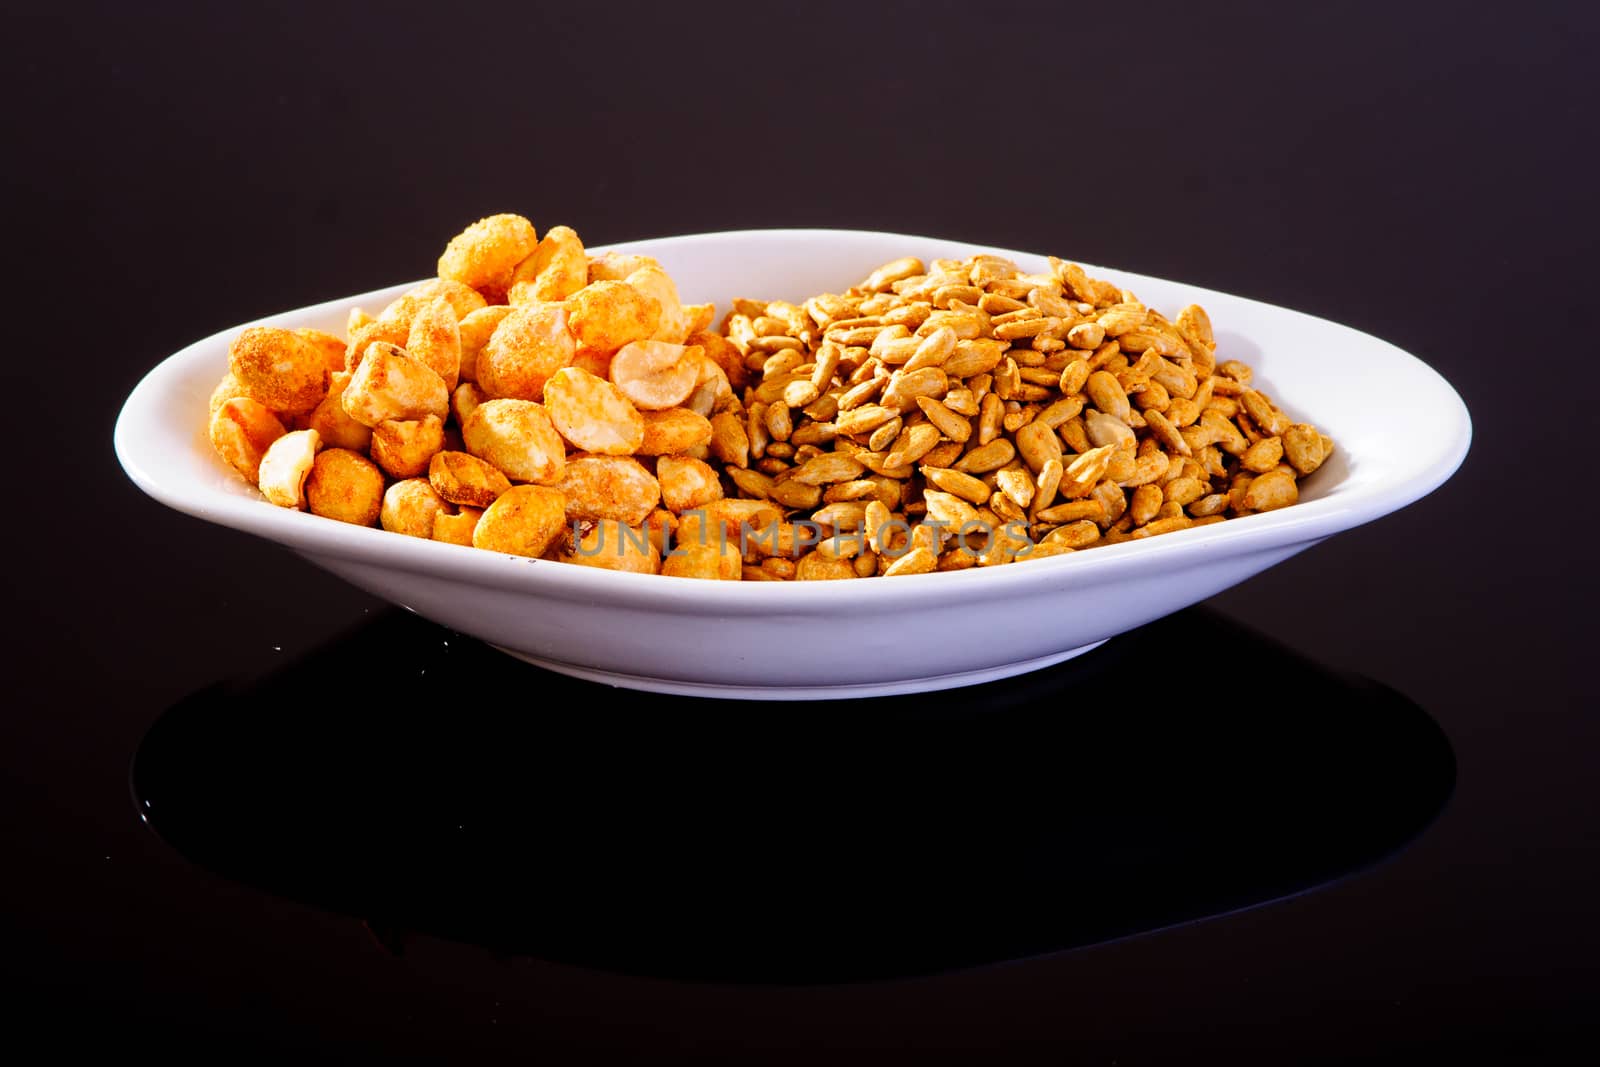 Pumpkin Seeds and Roasted Salted Peanuts in a white plate on a black background